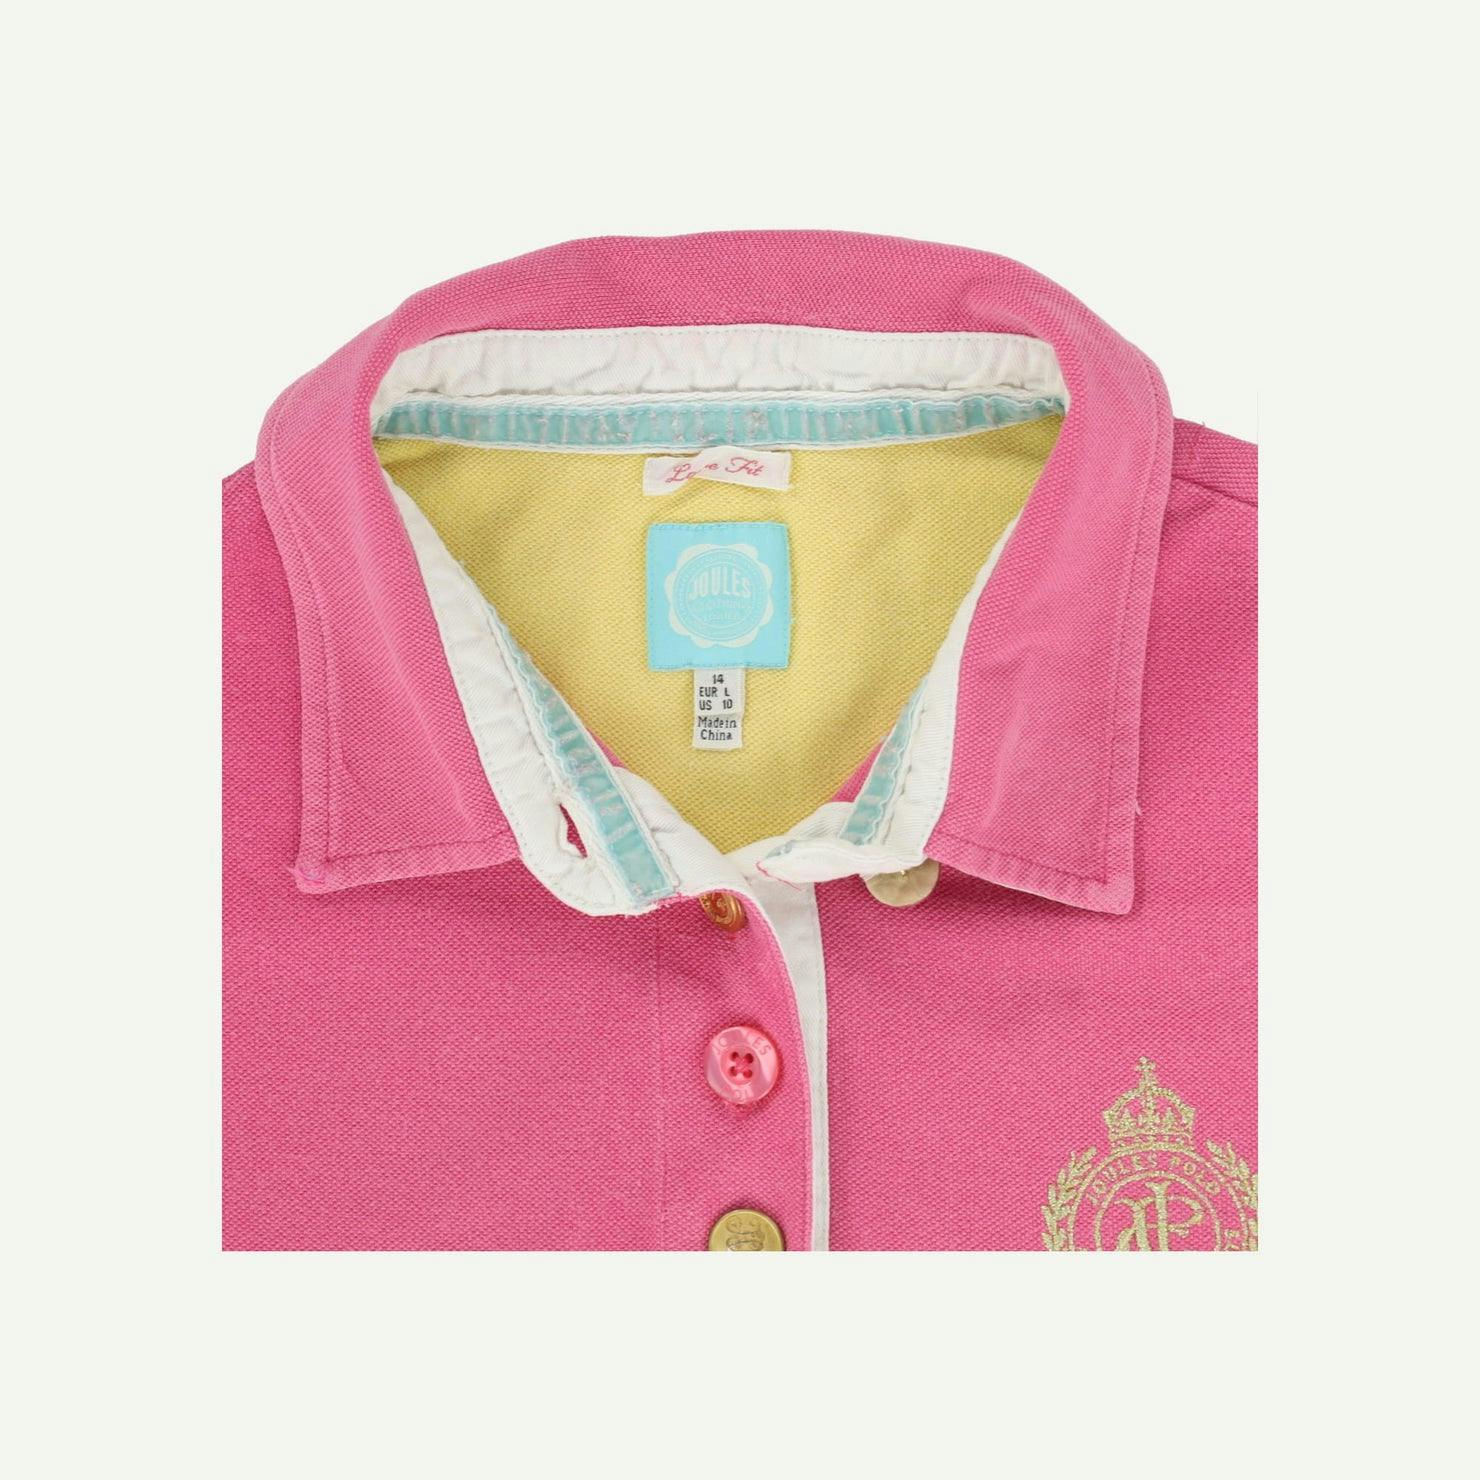 Joules Pre-loved Pink Polo Shirt